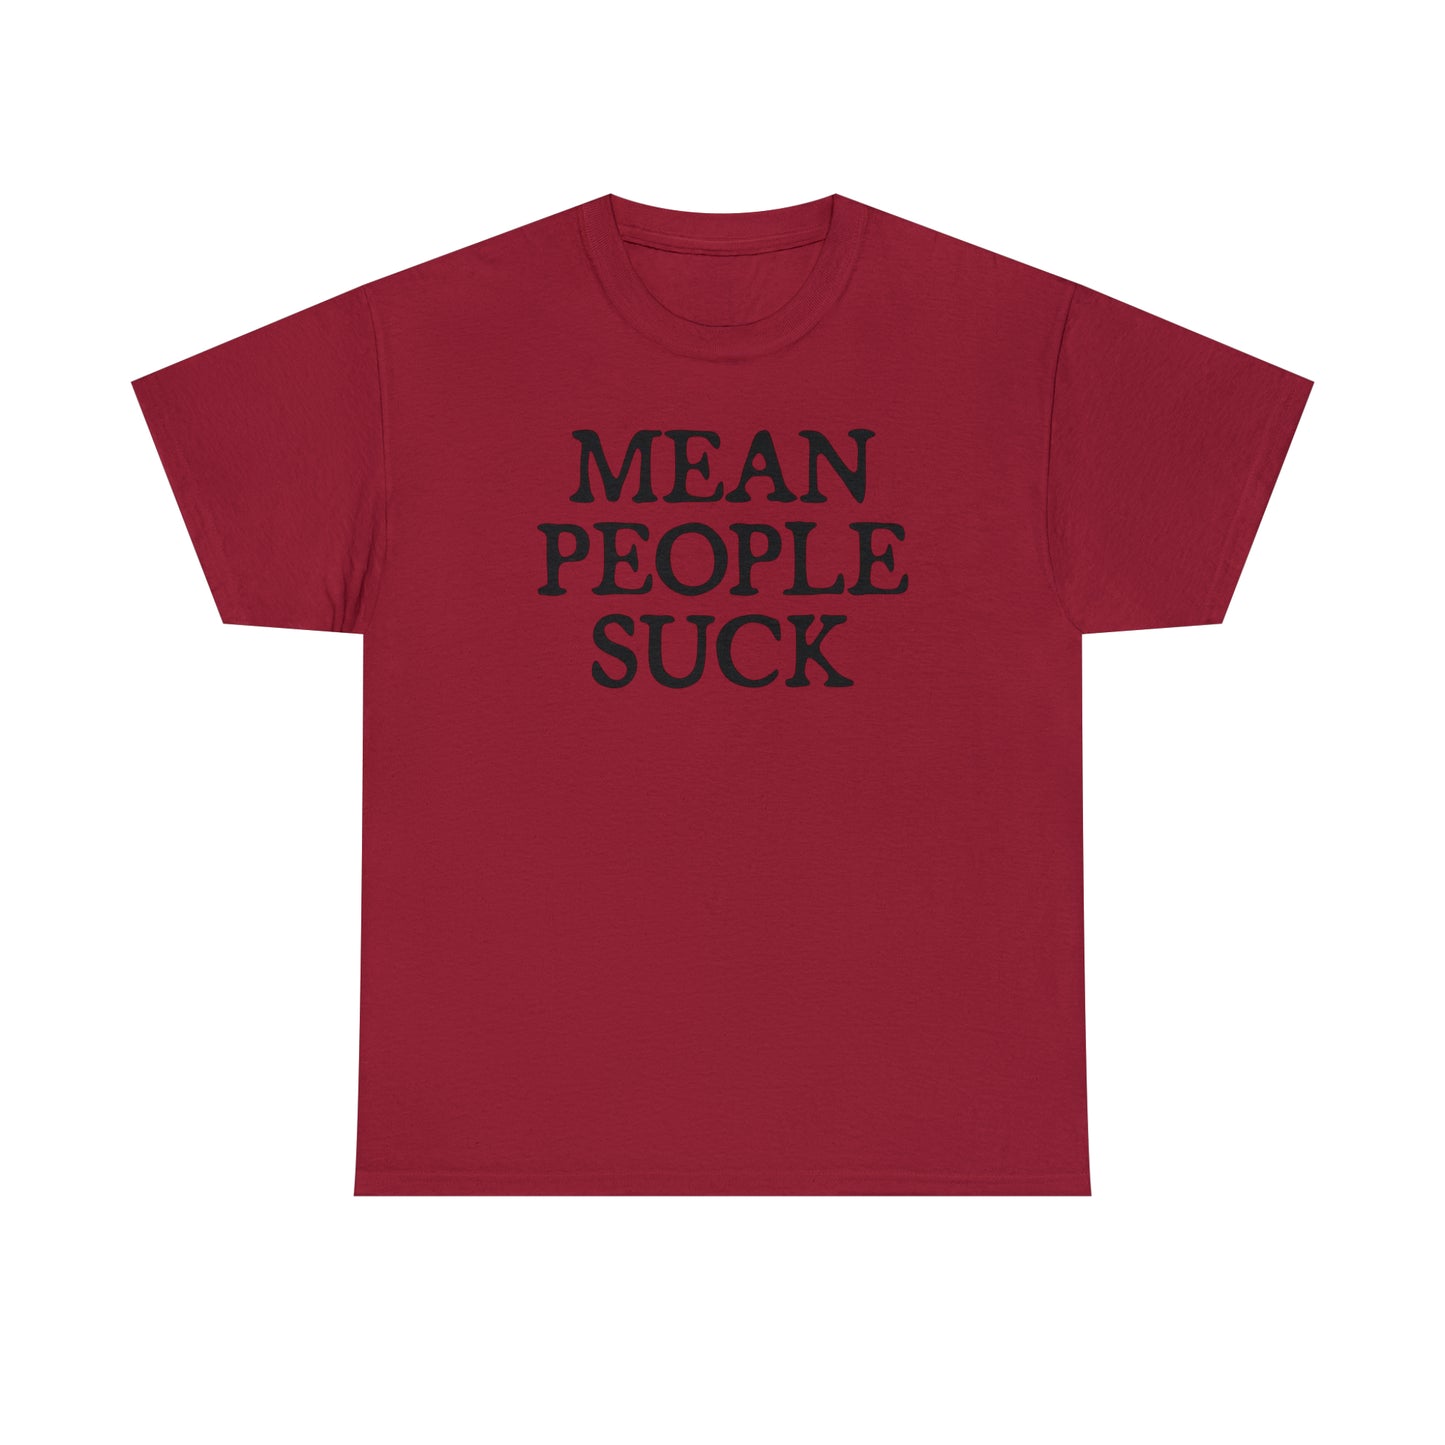 Mean People Suck T- Shirt For Sarcastic TShirt For Funny Saying T Shirt For PSA T Shirt For Birthday Gift